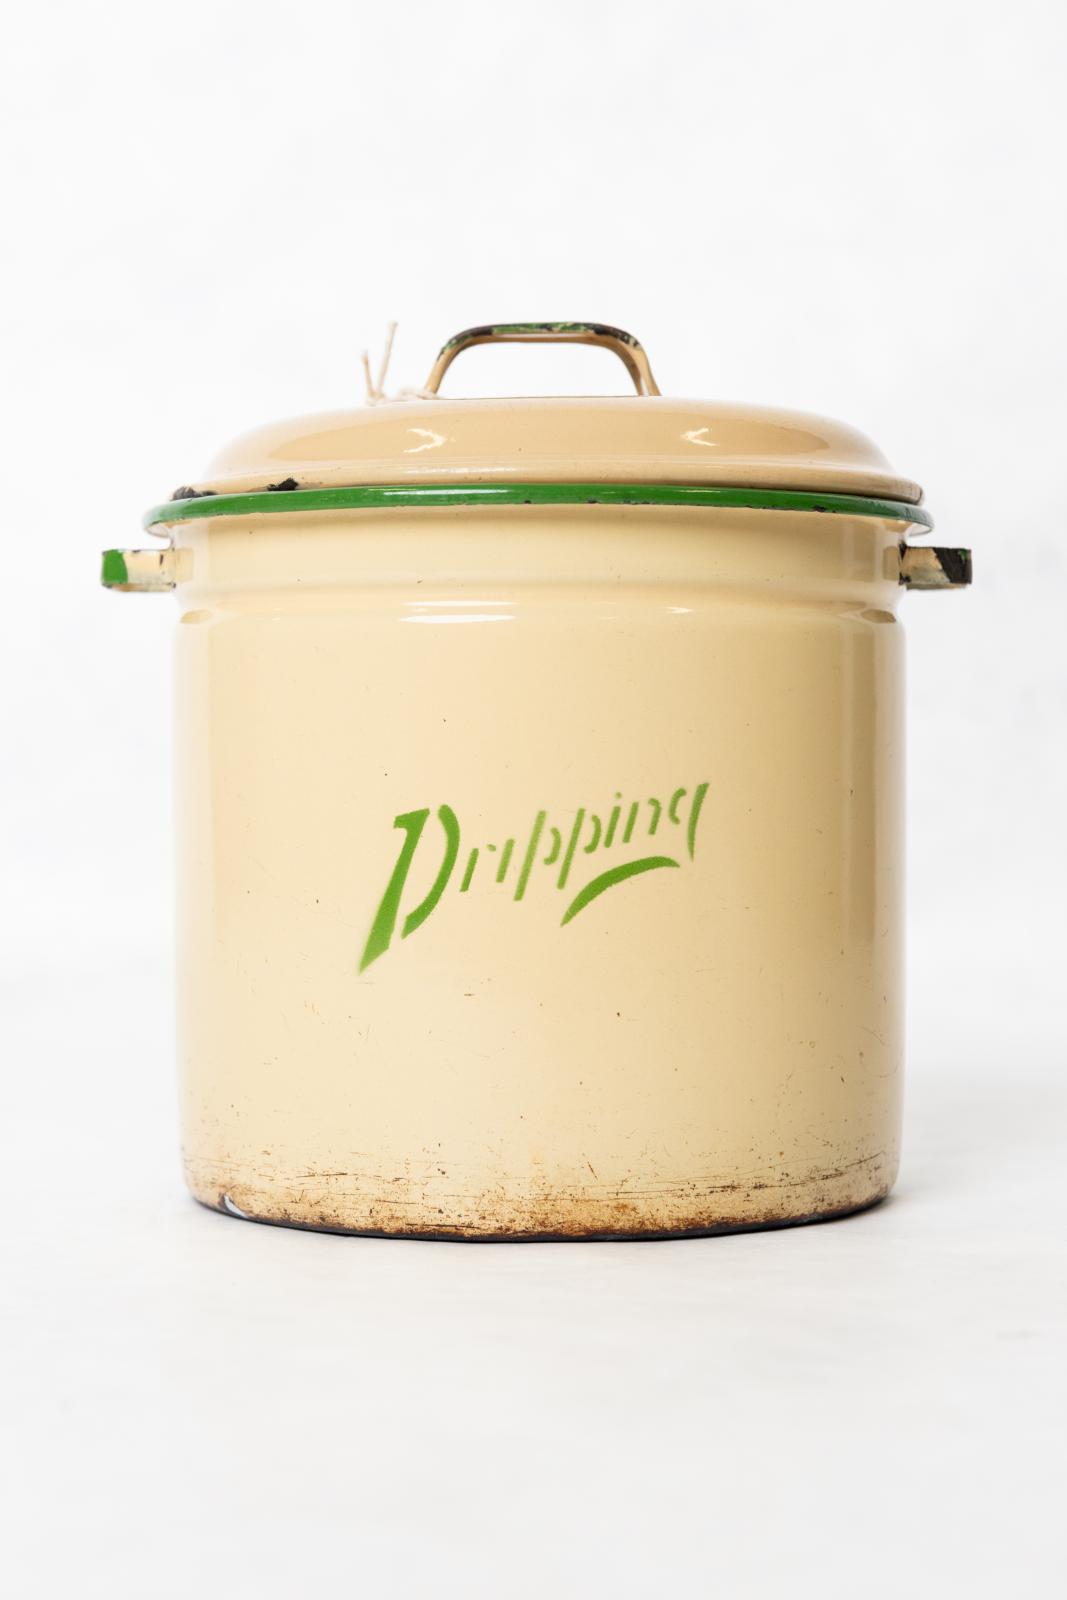 Cylindrical, metal, cream coloured, enamel 'Dripping' container. Round base with tall sides with a rounded green enamelled rim. A small thin, square, green enamelled handle, is welded to each side. On the front in the middle of the canister at a slight angle, painted green is the word 'Dripping'. Cream enamelled, tin lid. Narrow rim around the edge. The lid then curves upwards with another shallow circular ridge around the middle. In the centre, on top of the lid, is a small, square, green enamelled, handle